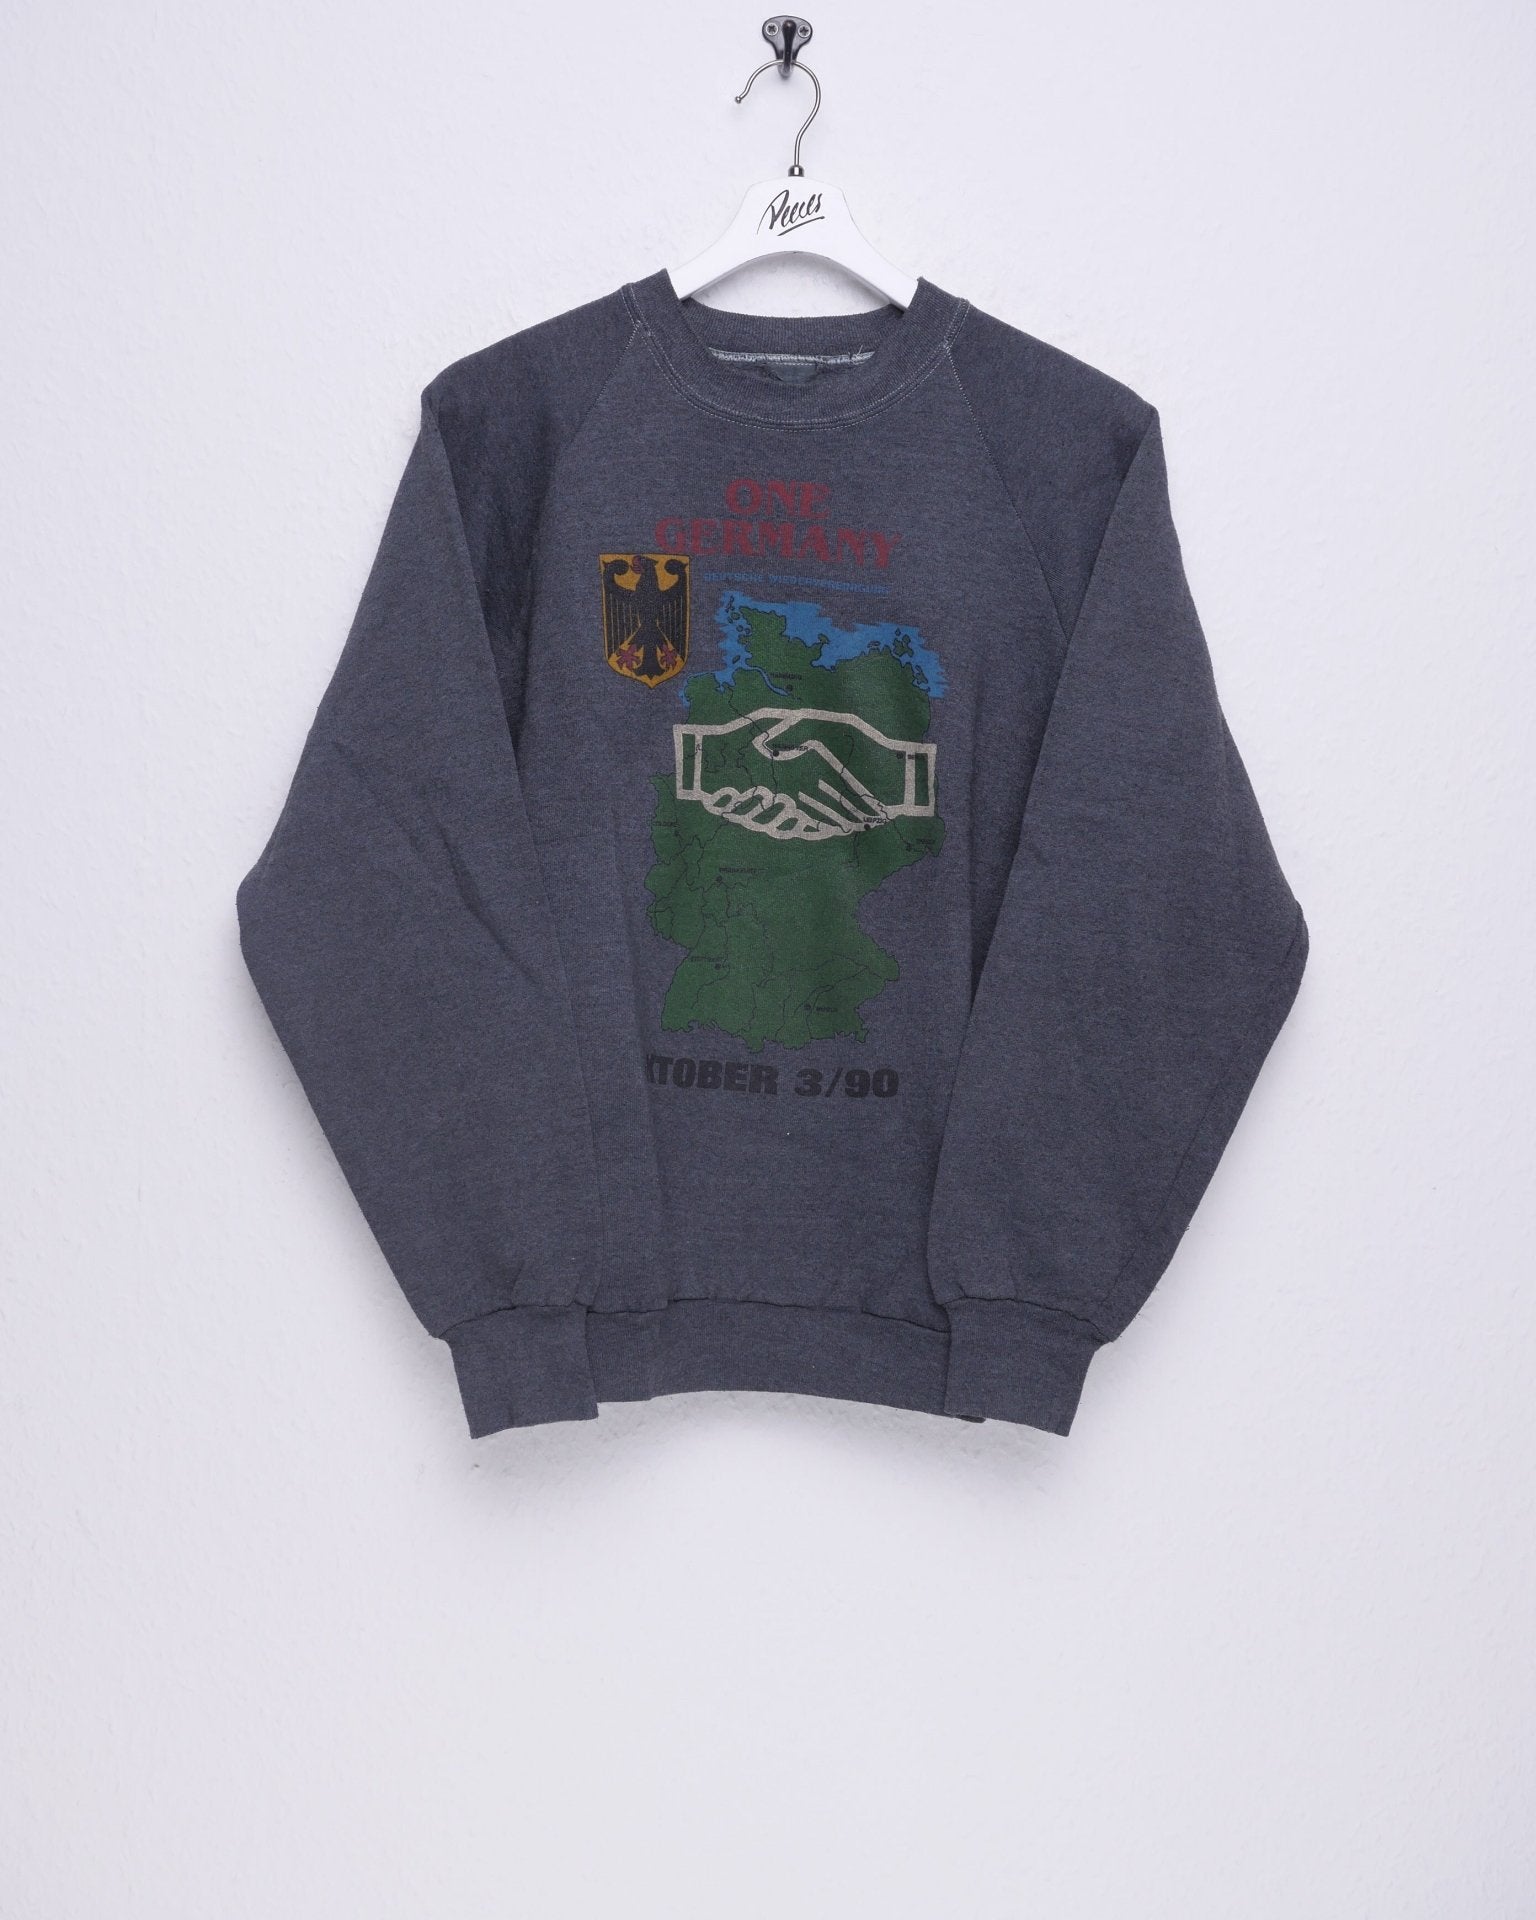 'One Germany' printed Graphic Vintage Sweater - Peeces